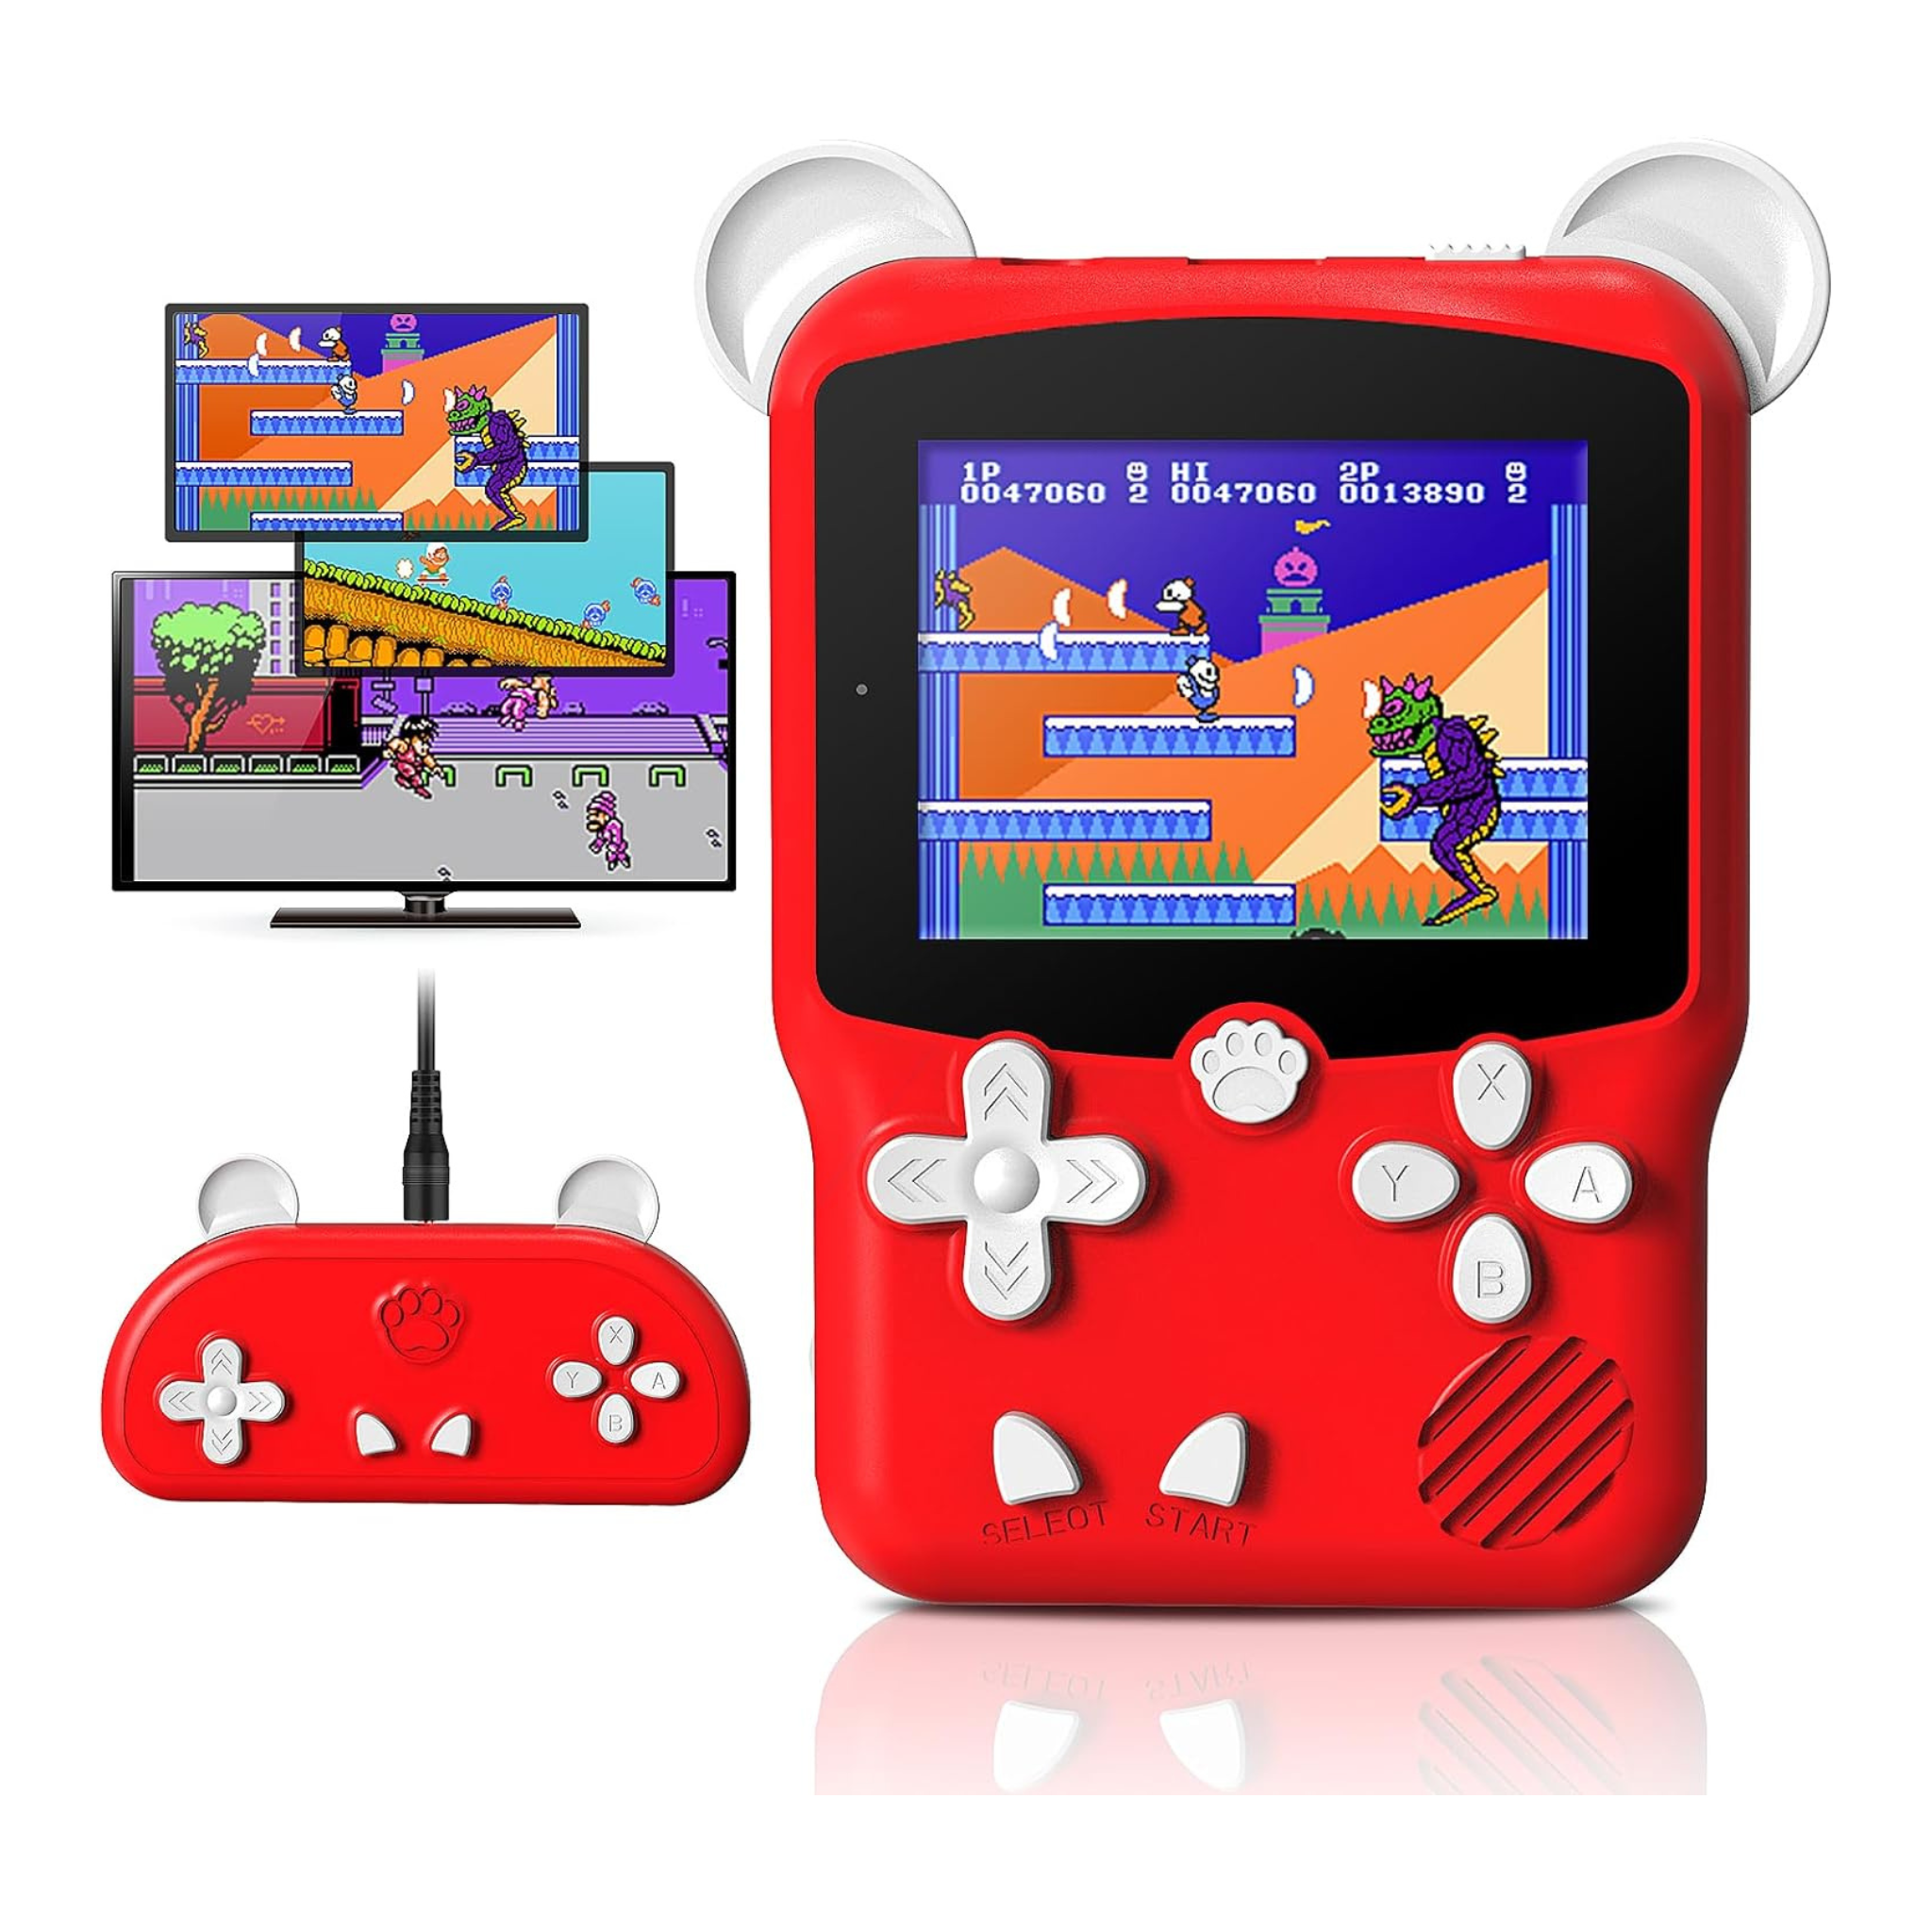 Portable Handheld Game Console with 999 Classic Games